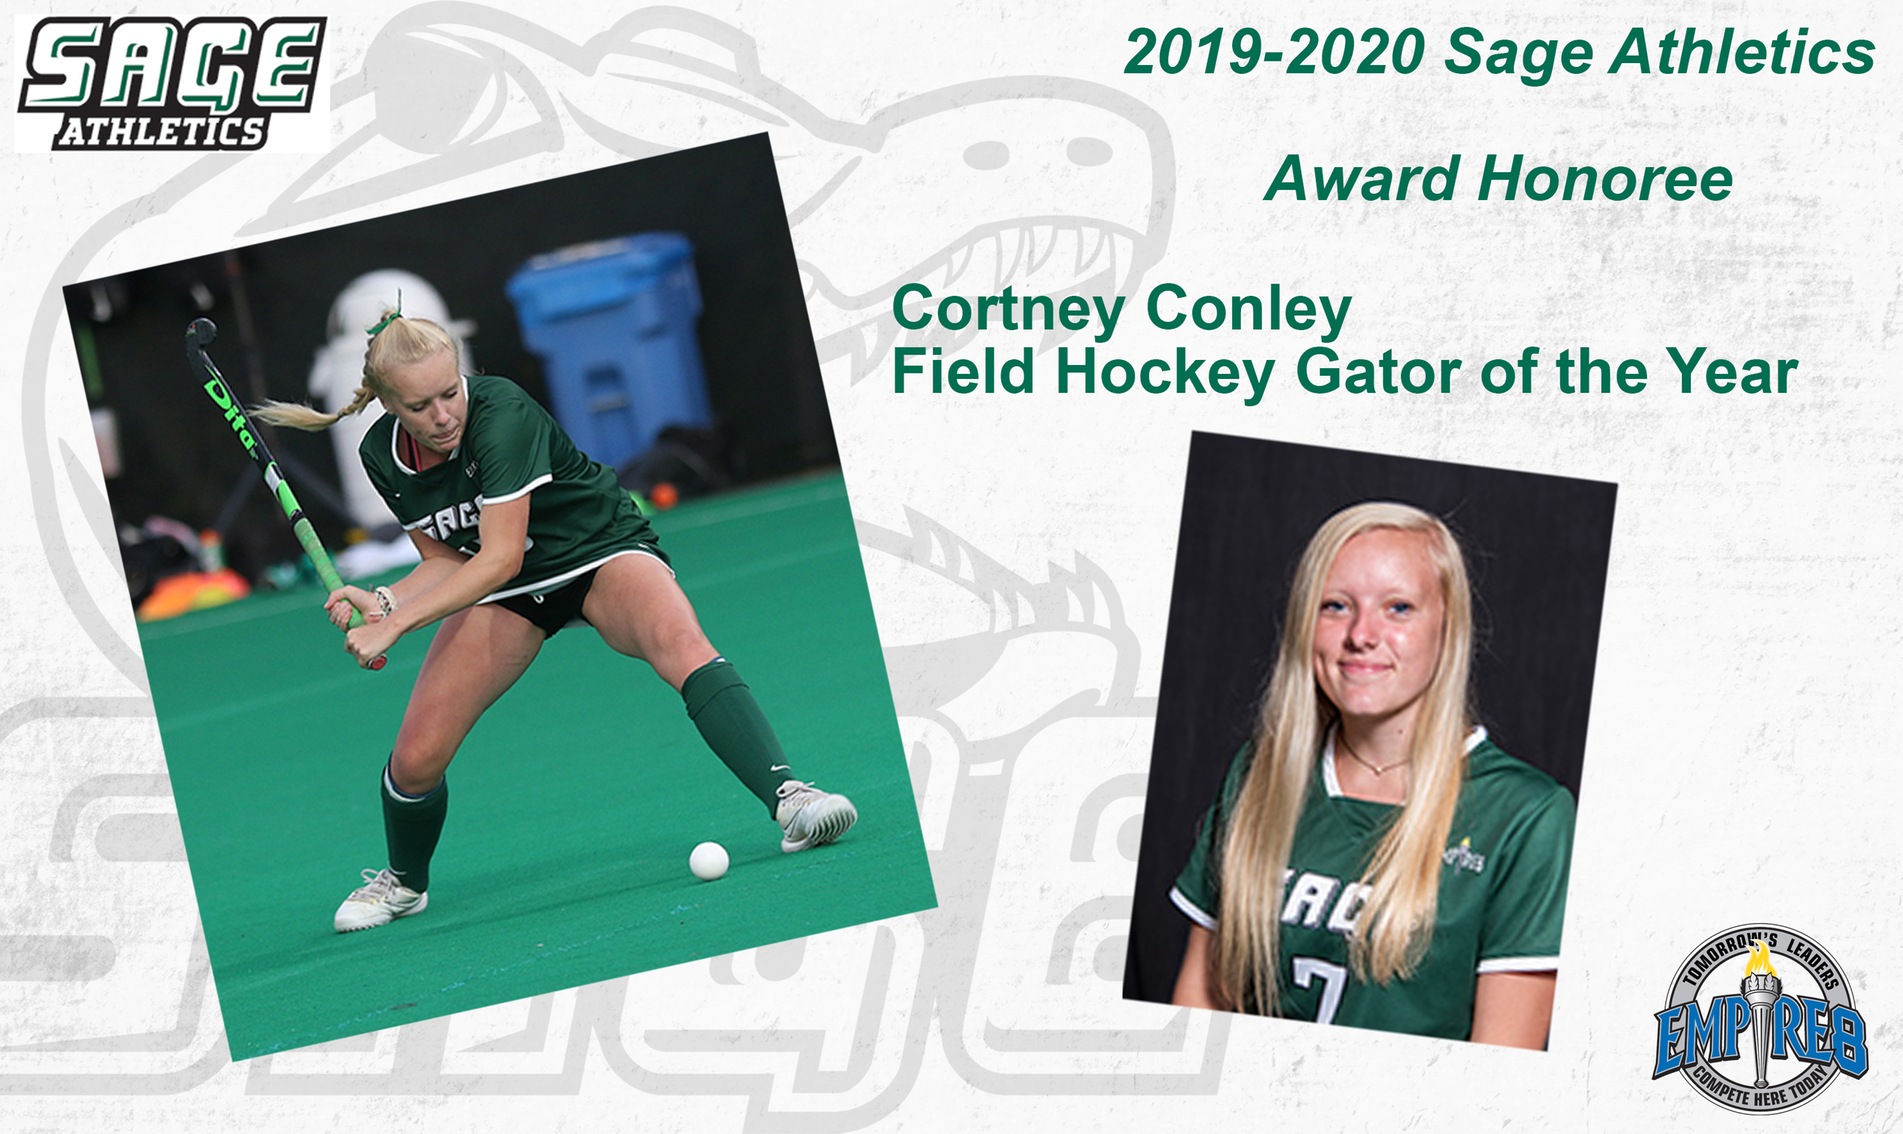 Cortney Conley honored as Field Hockey Gator of the Year